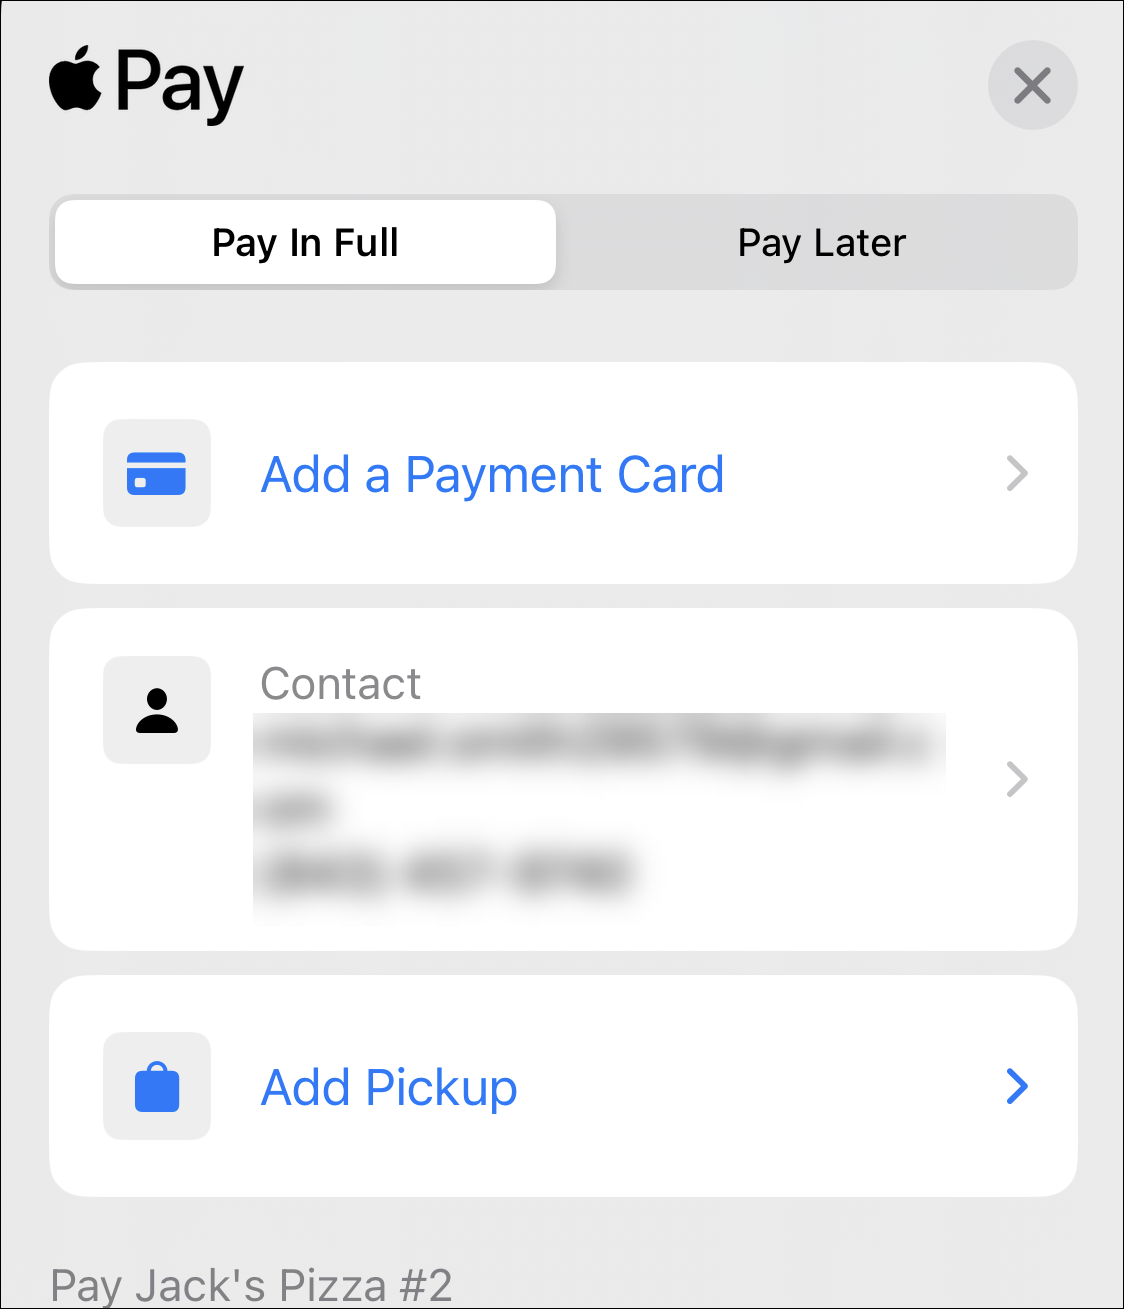 Checkout with apple pay screen displays on smartphone